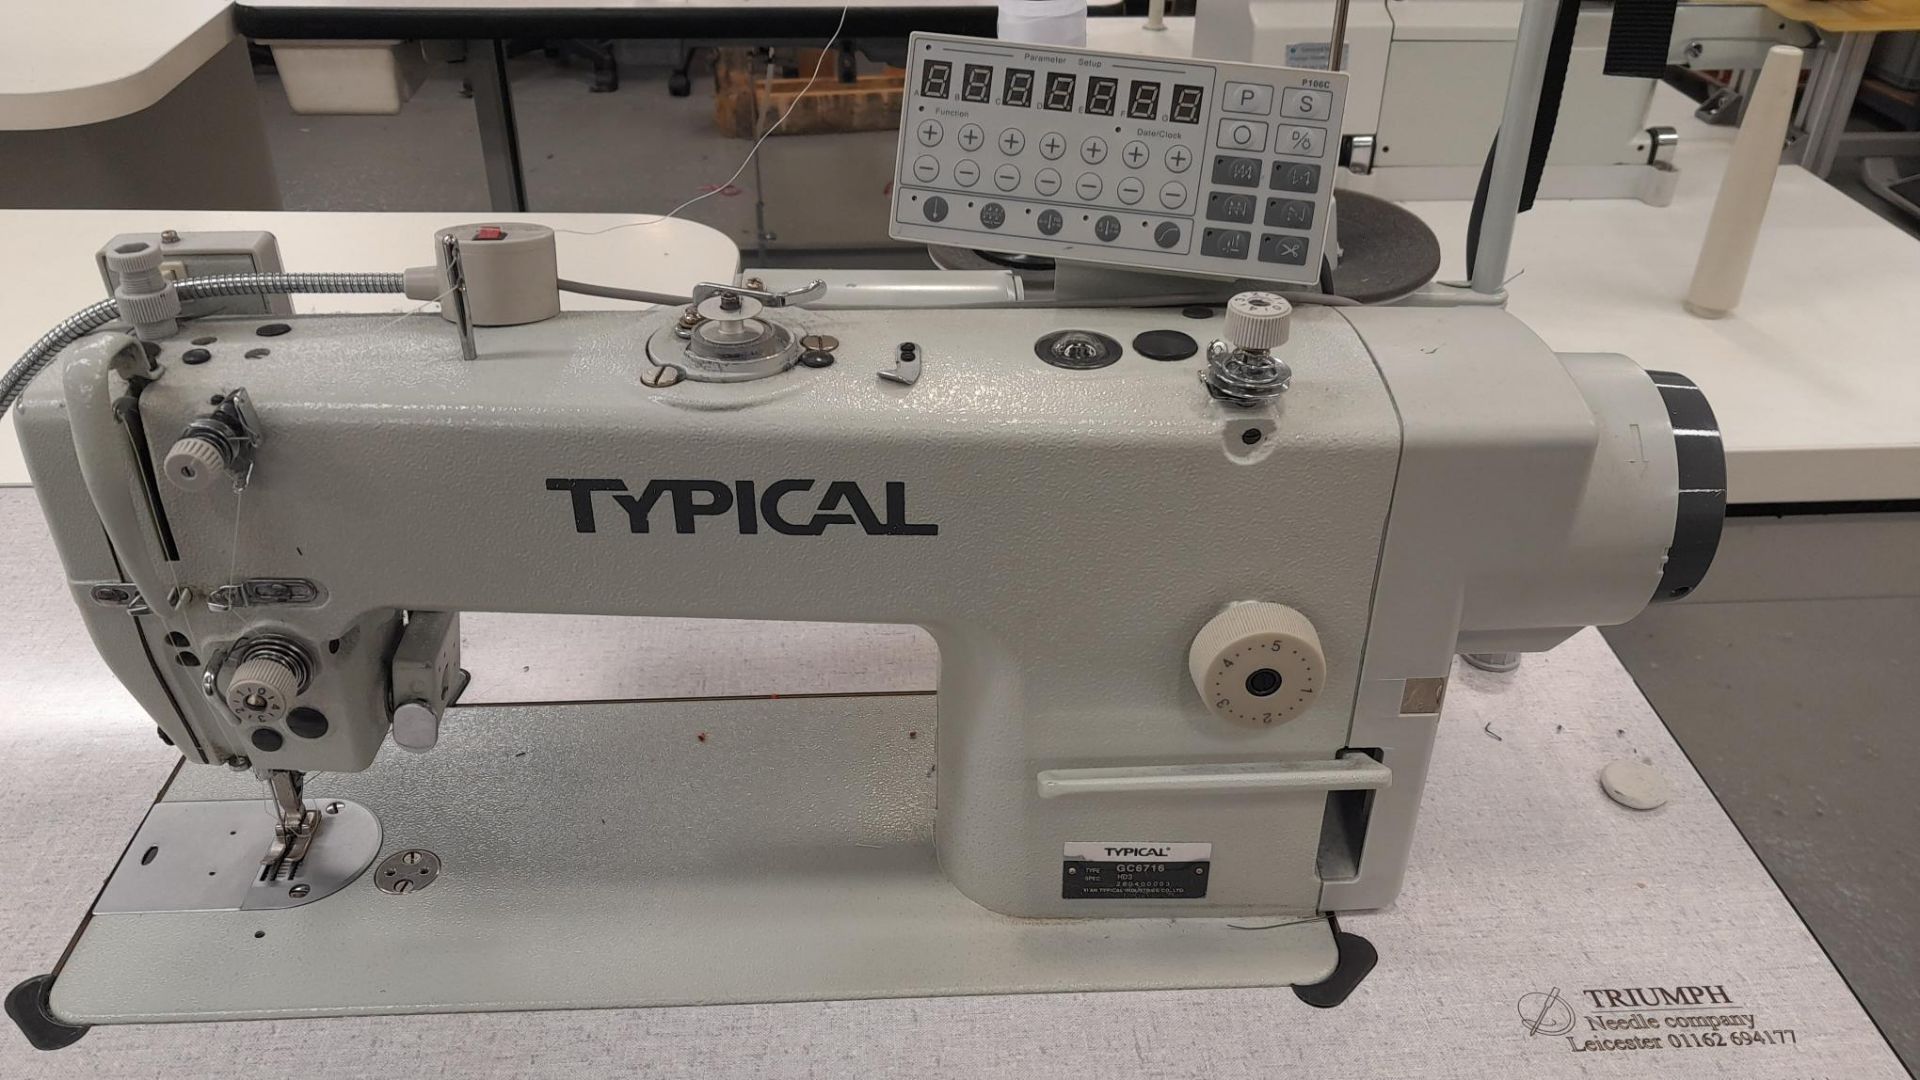 Typical GC6716-HD3 Flatbed Sewing Machine Serial Number 280400003, 240v - Image 2 of 3